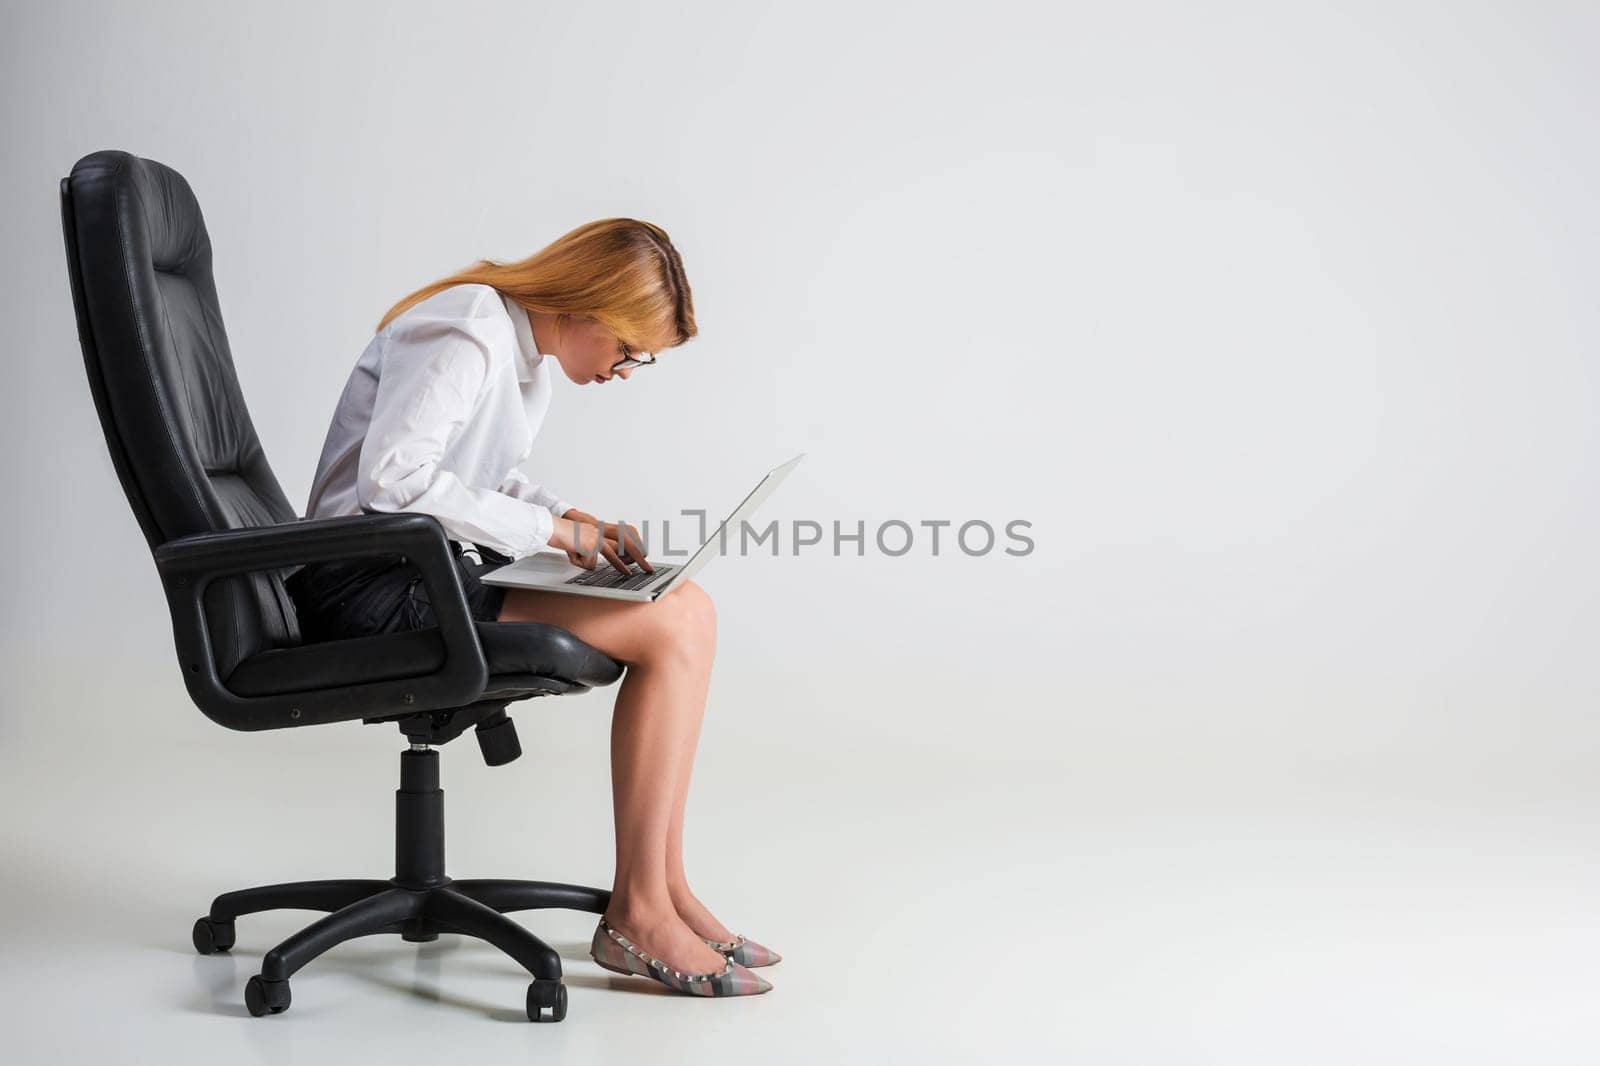 young woman sitting on the chair and using laptop. tired businesswoman under the weight of hard work. hunchbacked